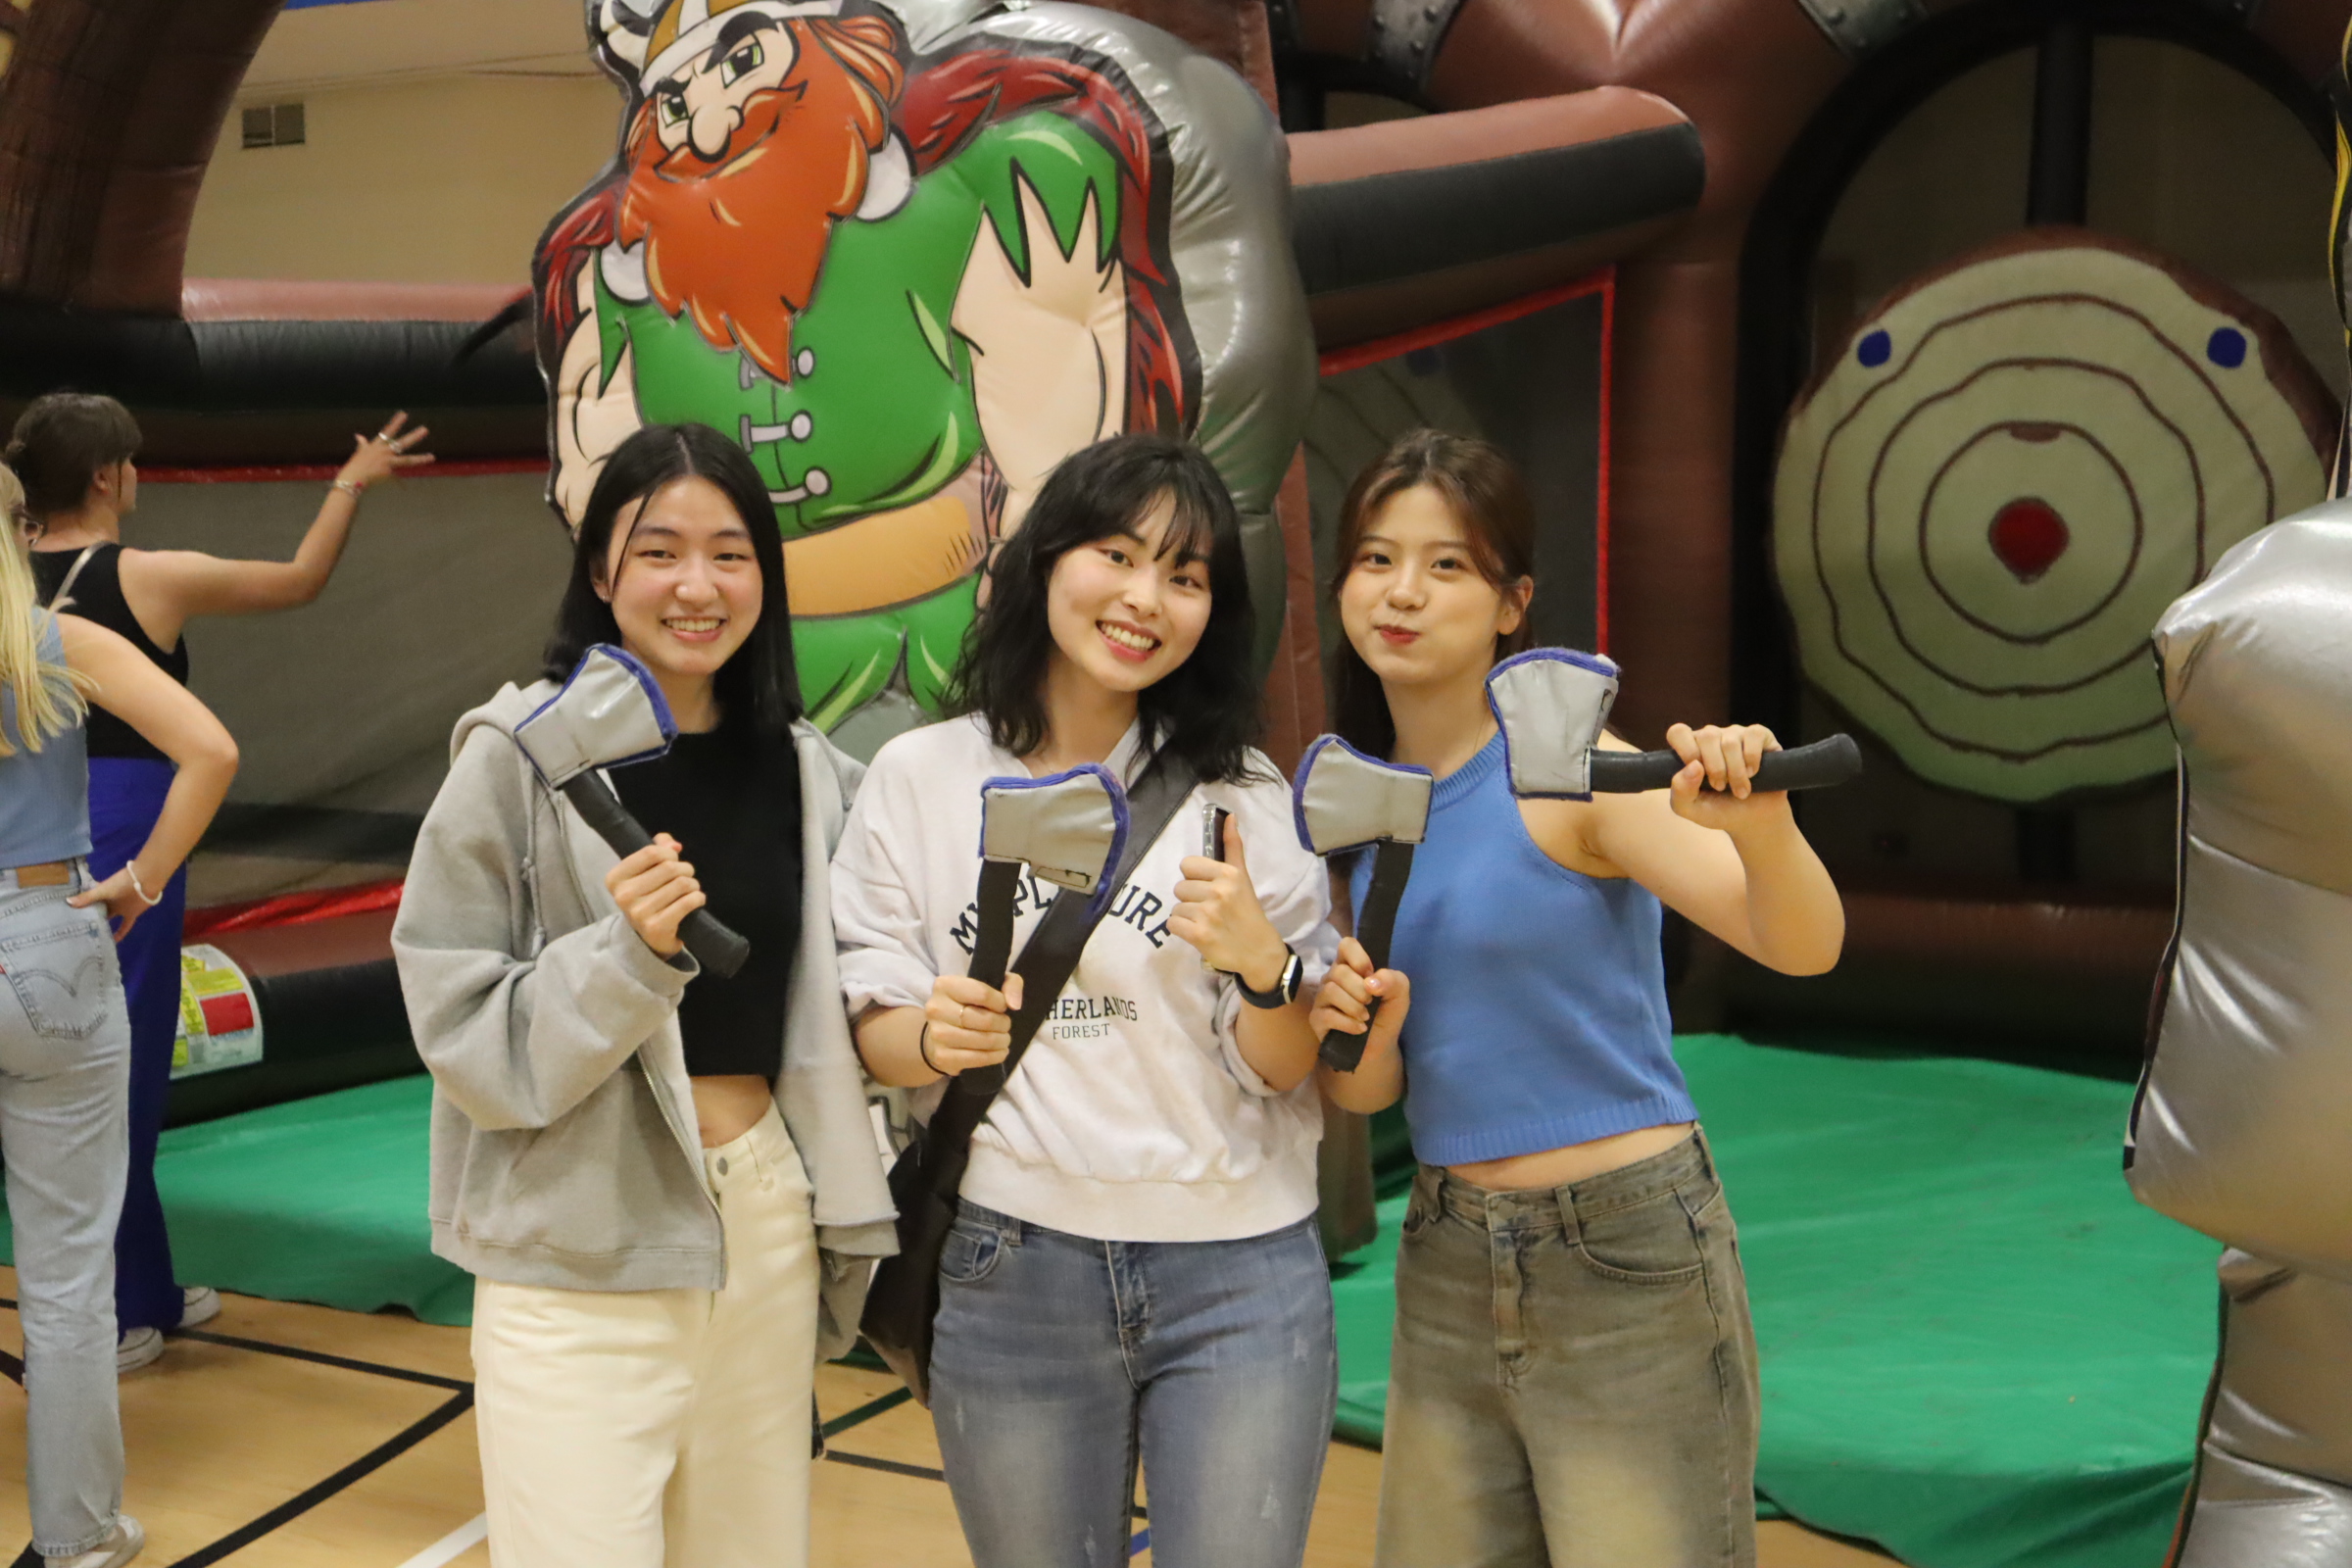 Students posing for a picture at an event